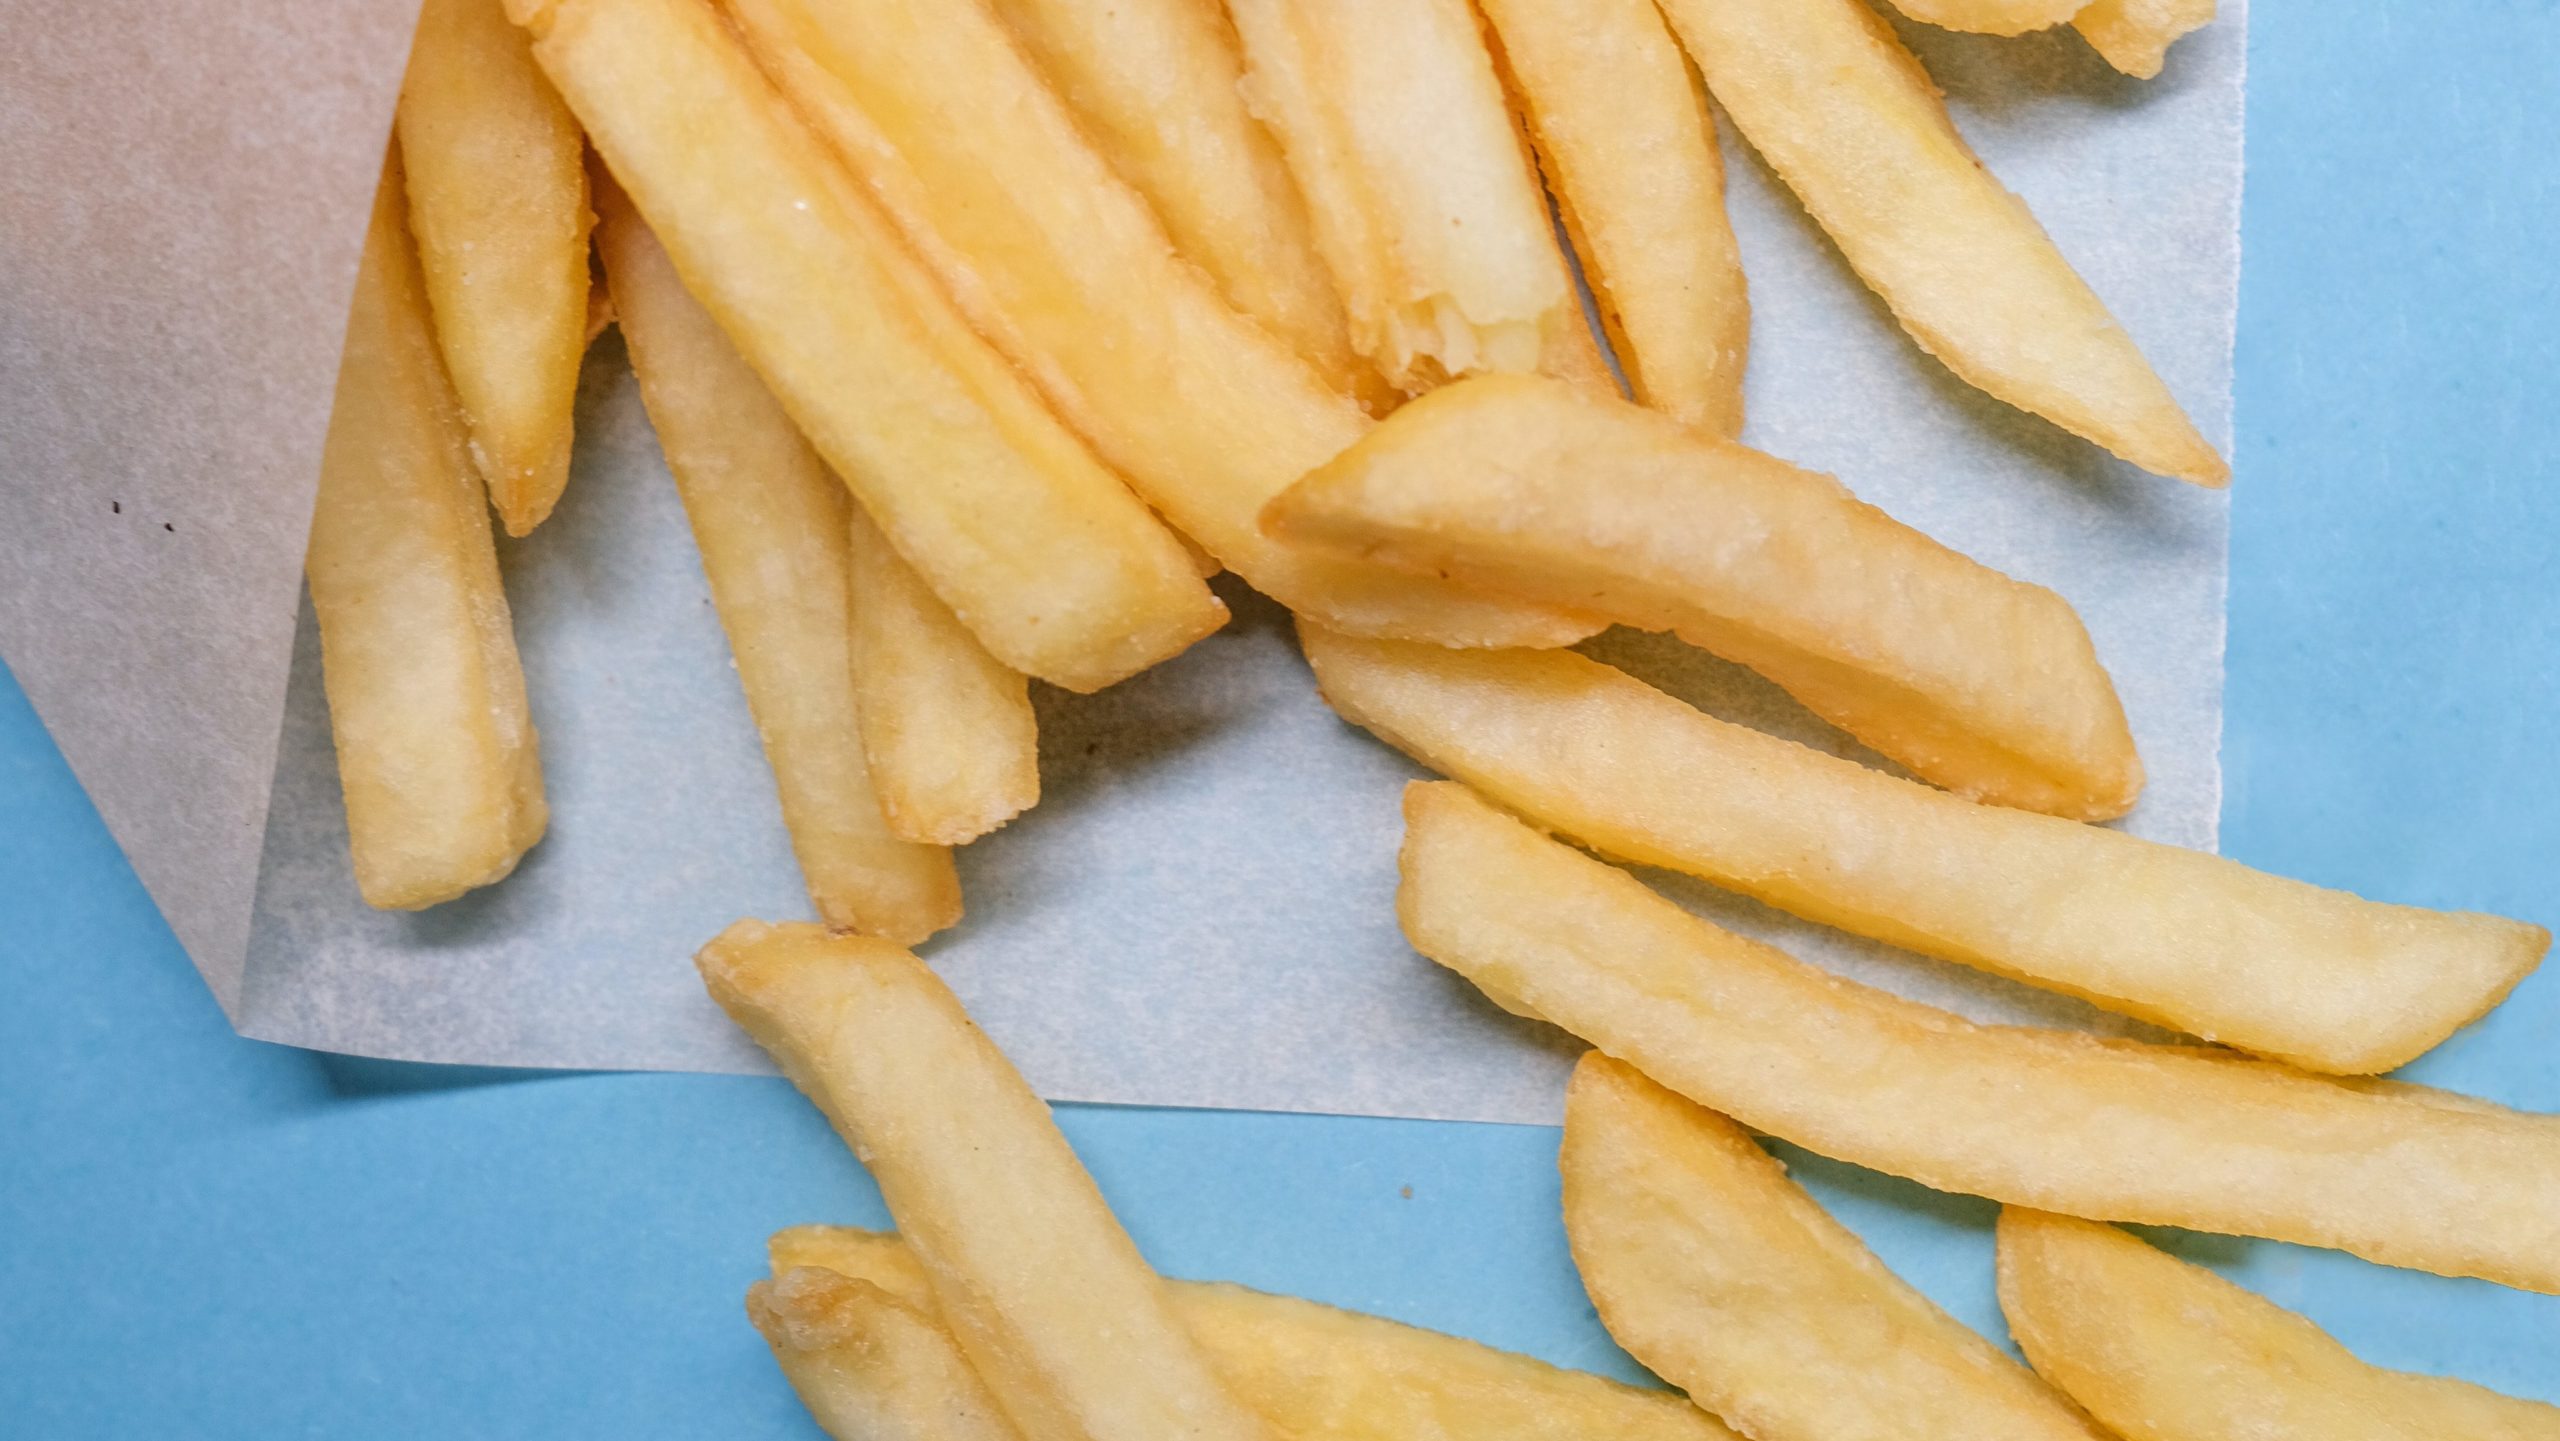 Generic stock photo of french fries on a blue background 